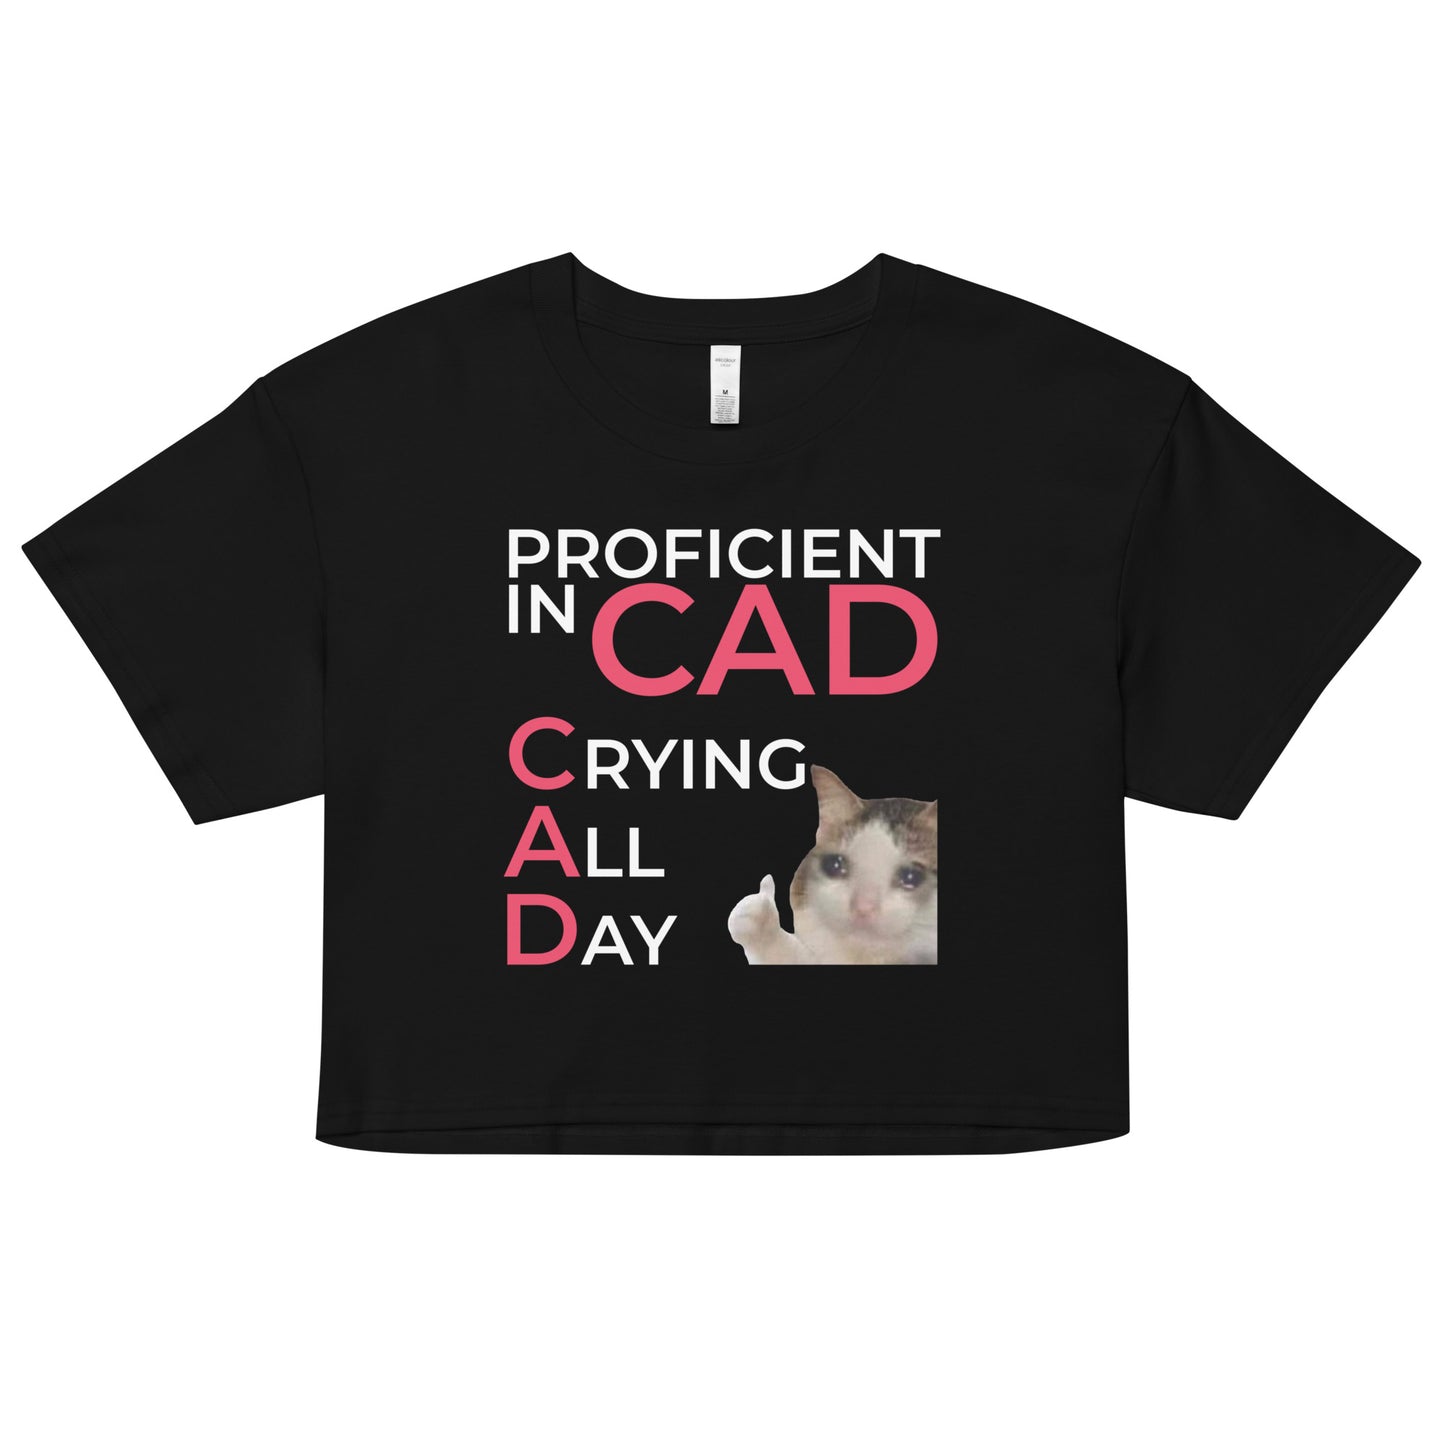 Proficient In CAD (Crying All Day) crop top